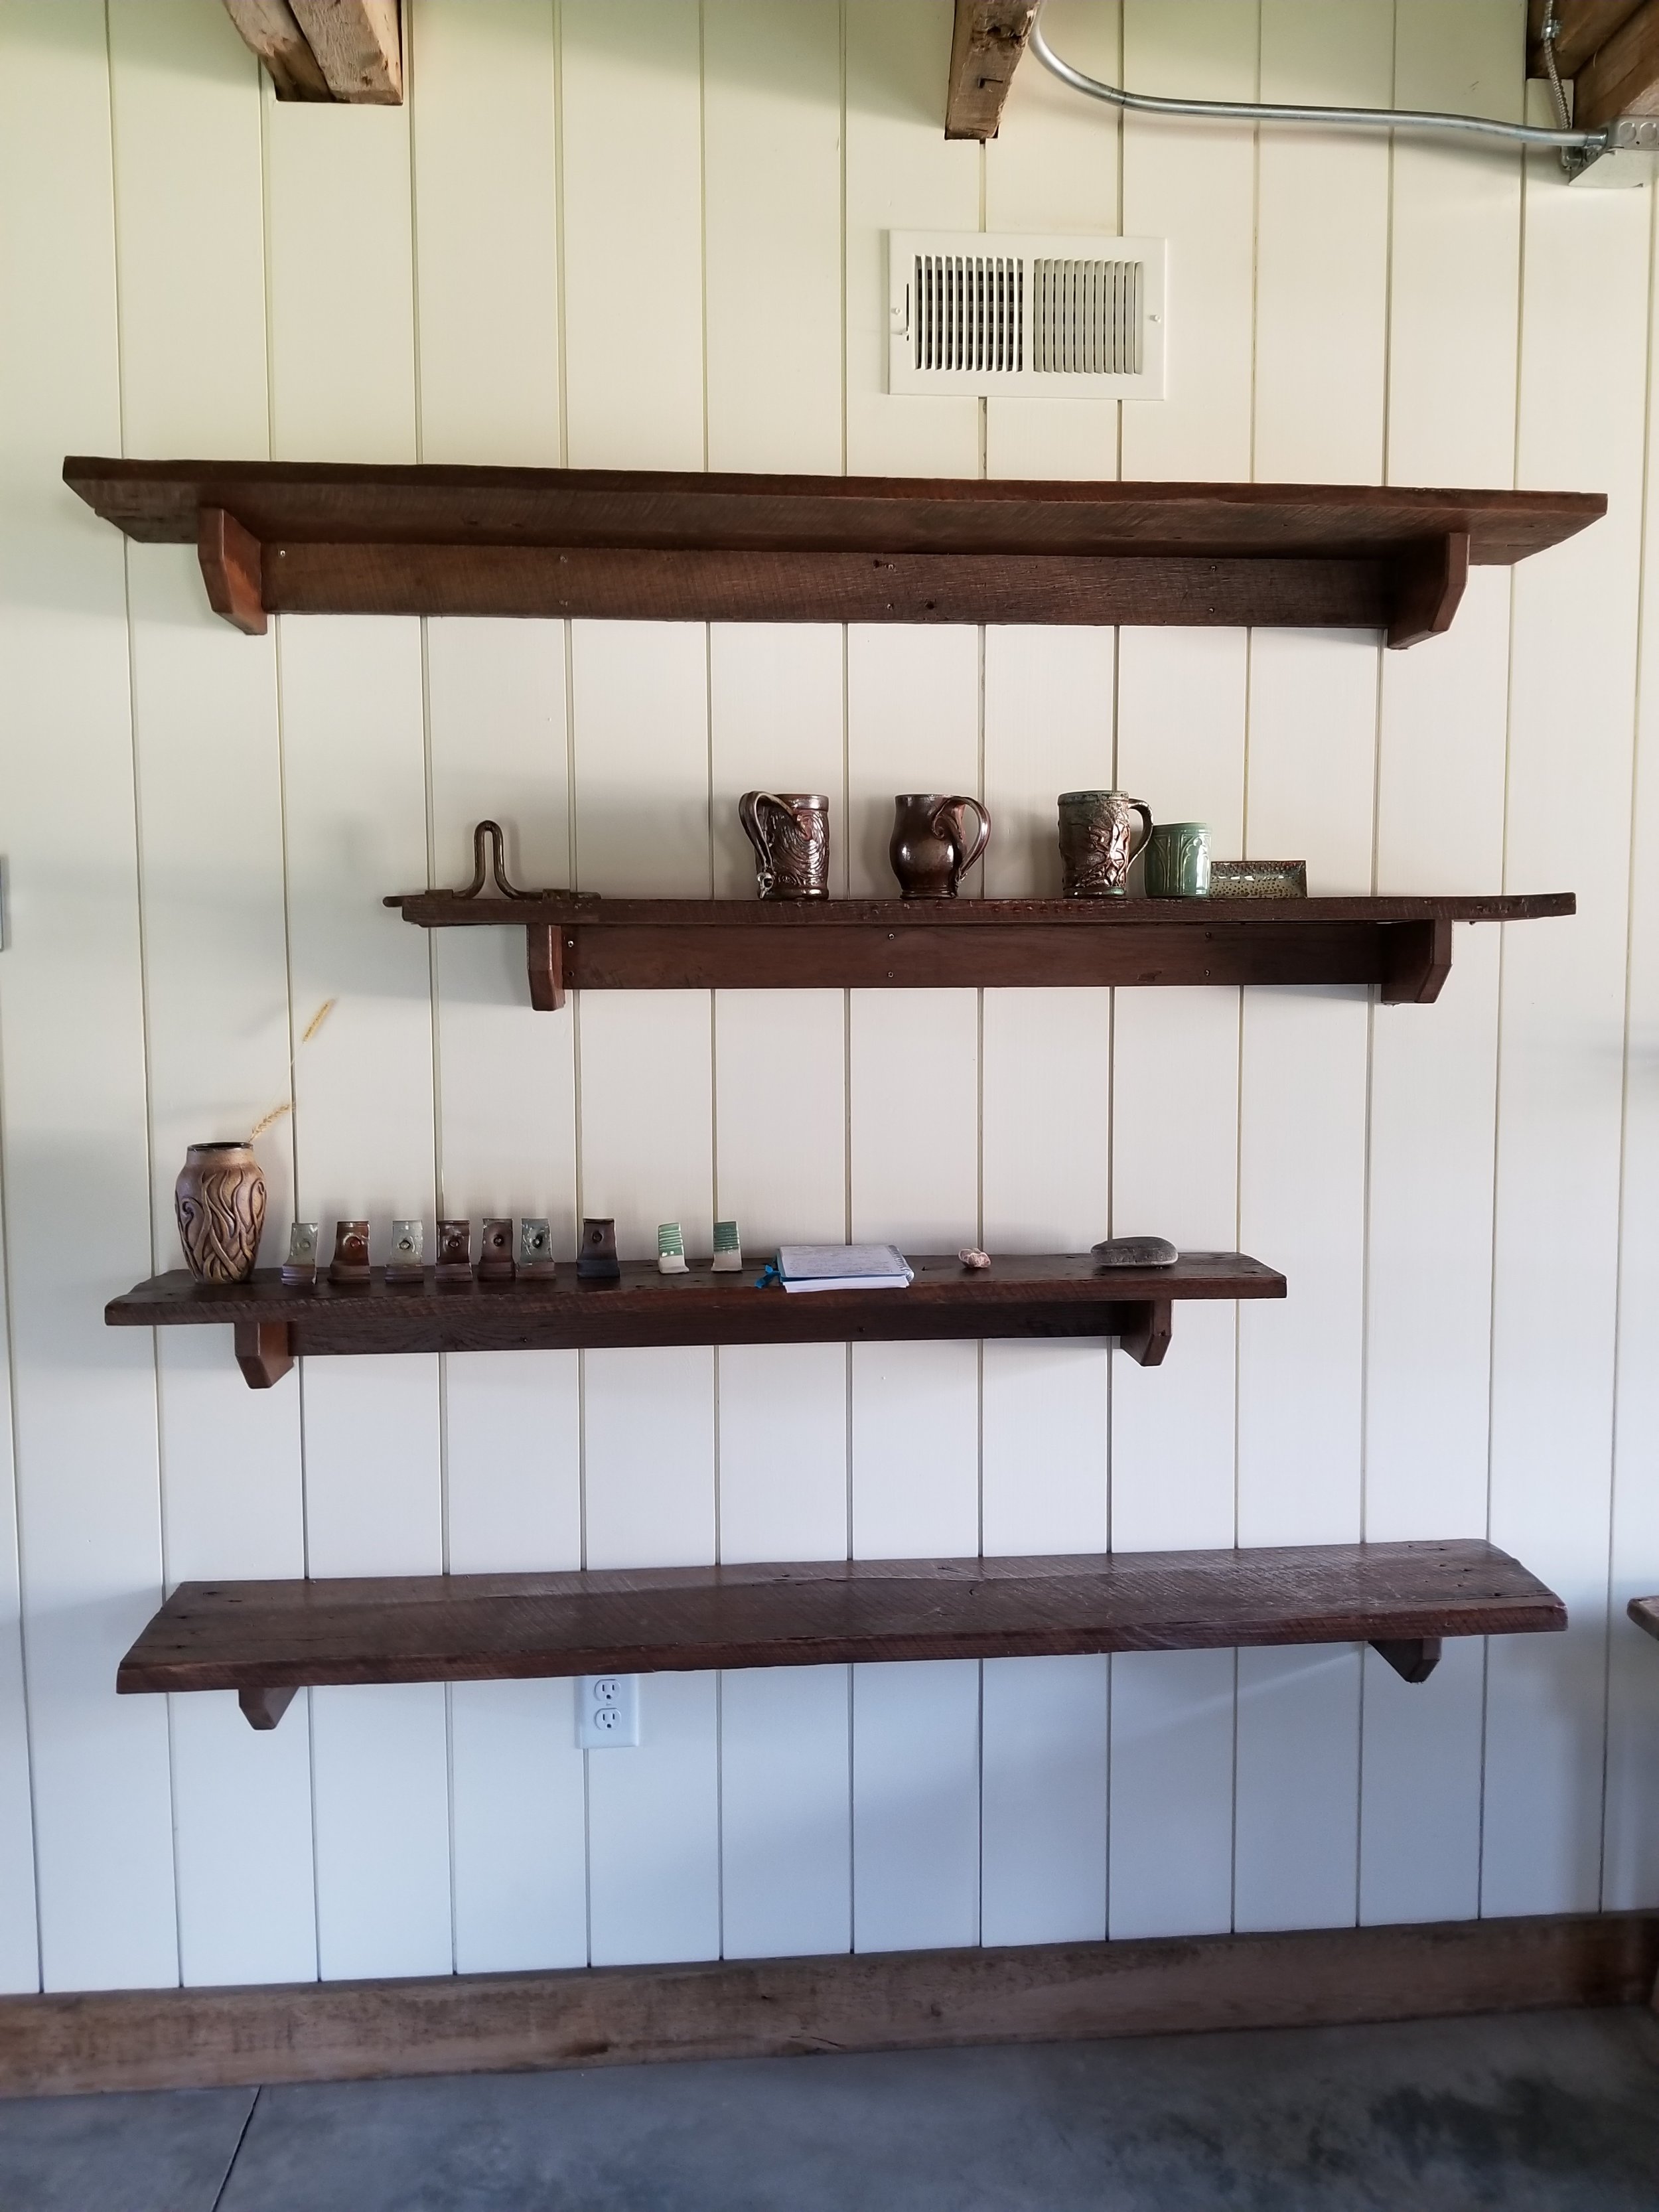 New shelving for pottery projects